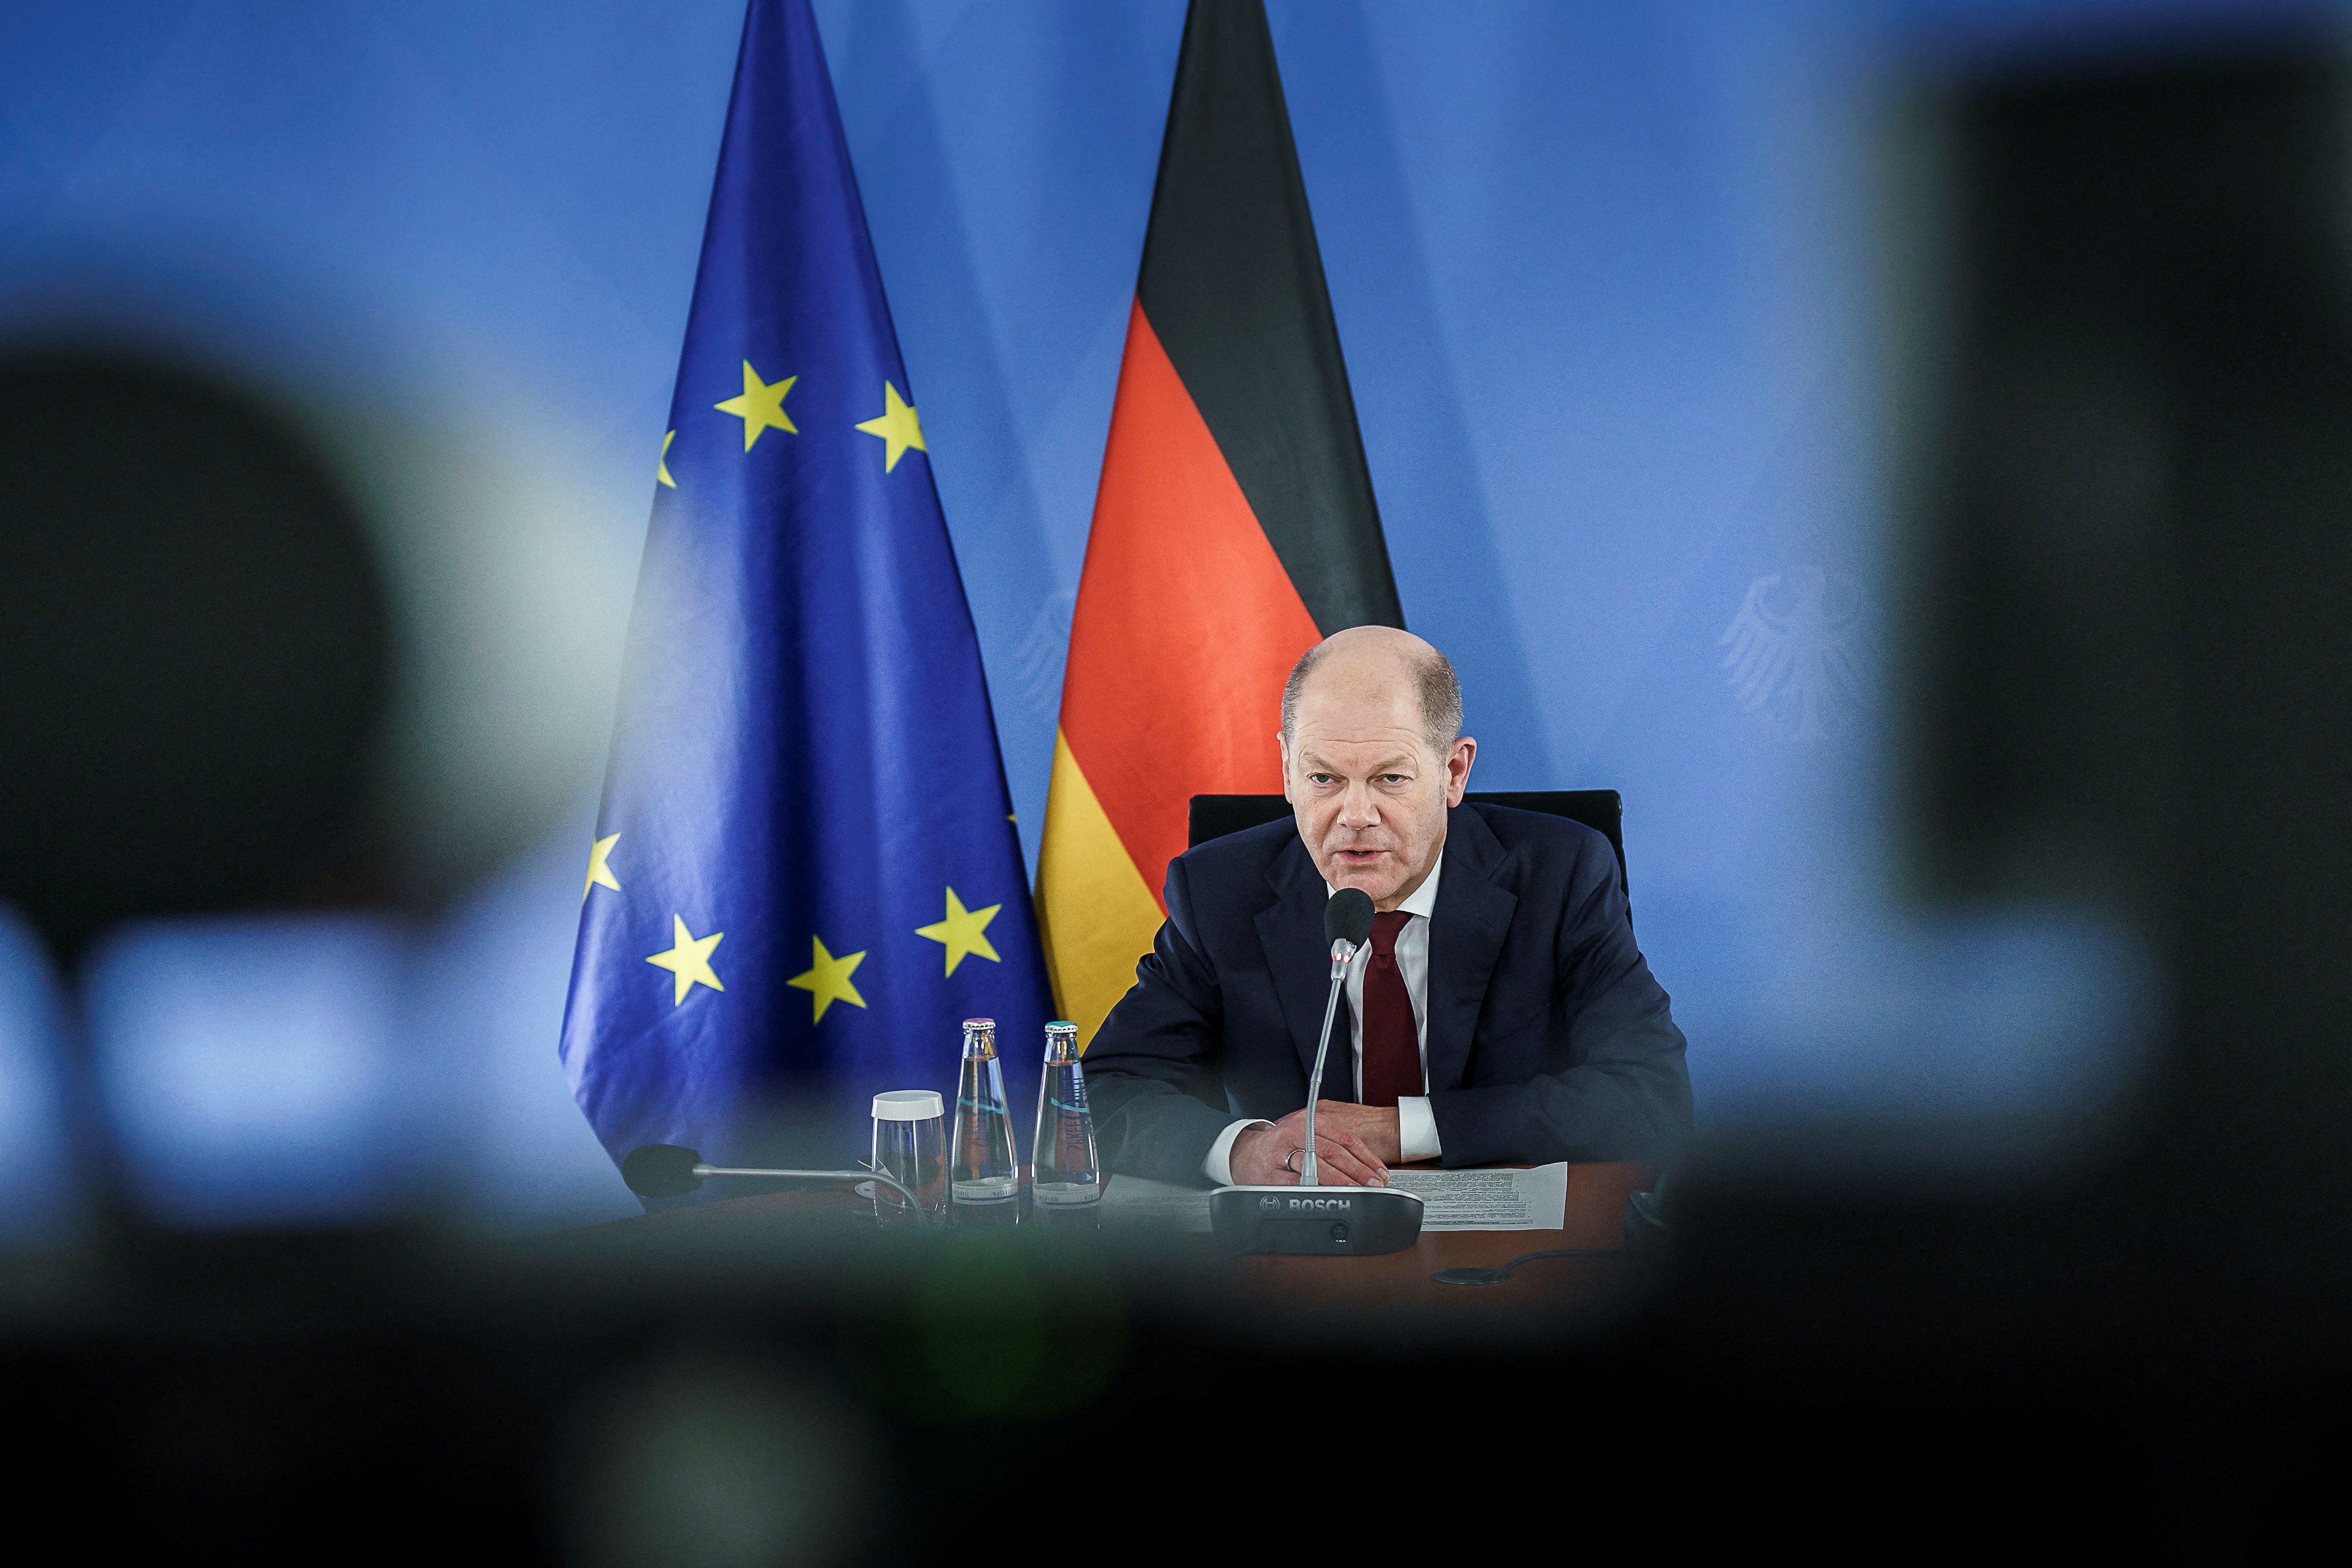 German Chancellor Scholz speaks with U.S. President Biden and European leaders about Russia and Ukraine